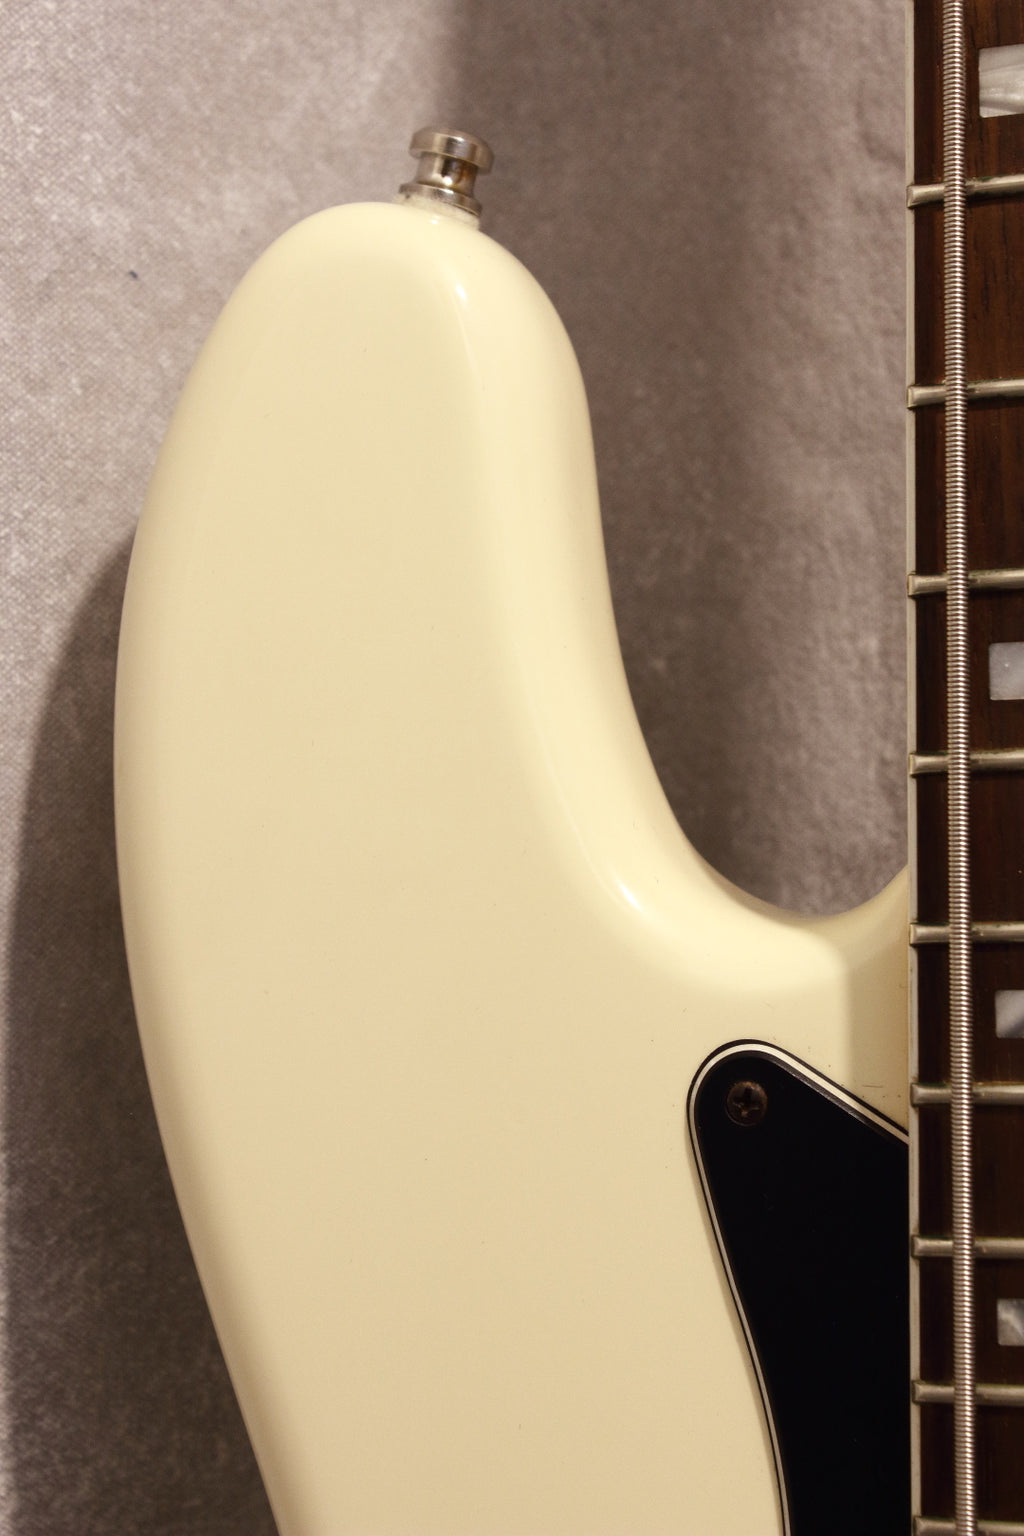 Fender American Deluxe Jazz Bass Olympic White 2015